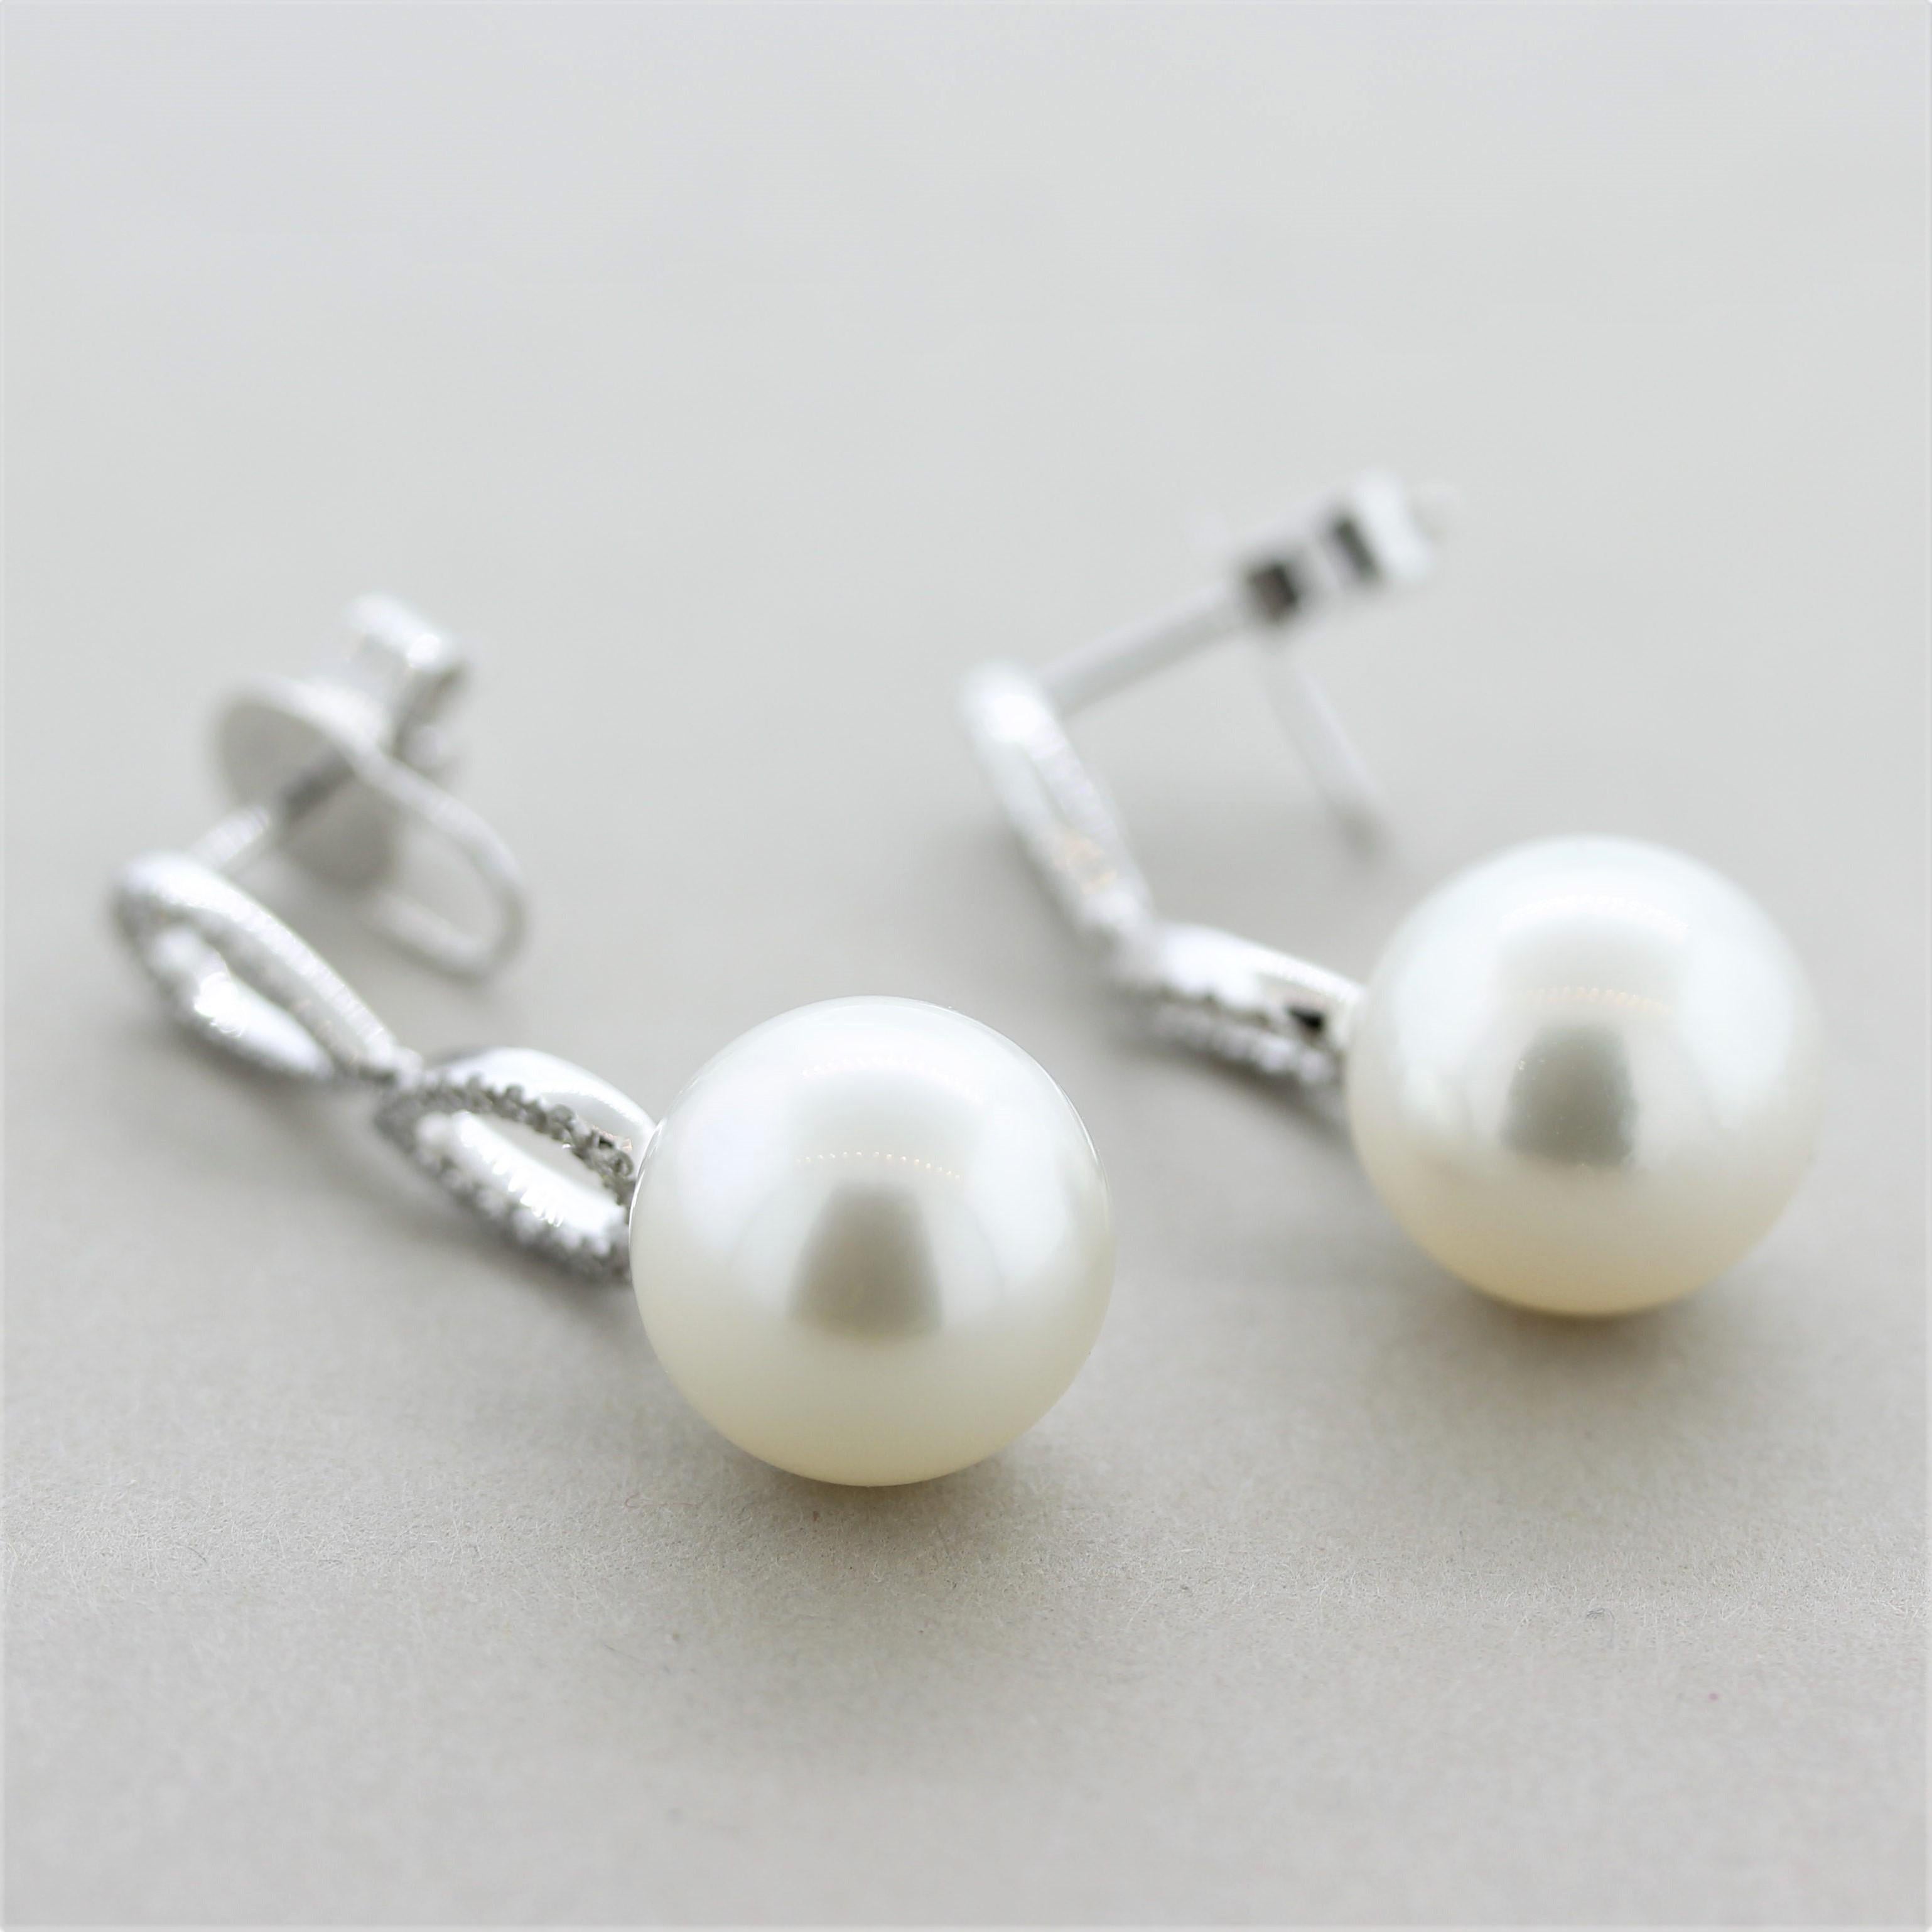 A fine and stylish pair of South Sea pearl drop earrings! The pearls are perfectly matching in shape, color, and size (12mm). They are perfectly round with excellent luster and a soft overtone as they glow in the light. They are accented by 0.44